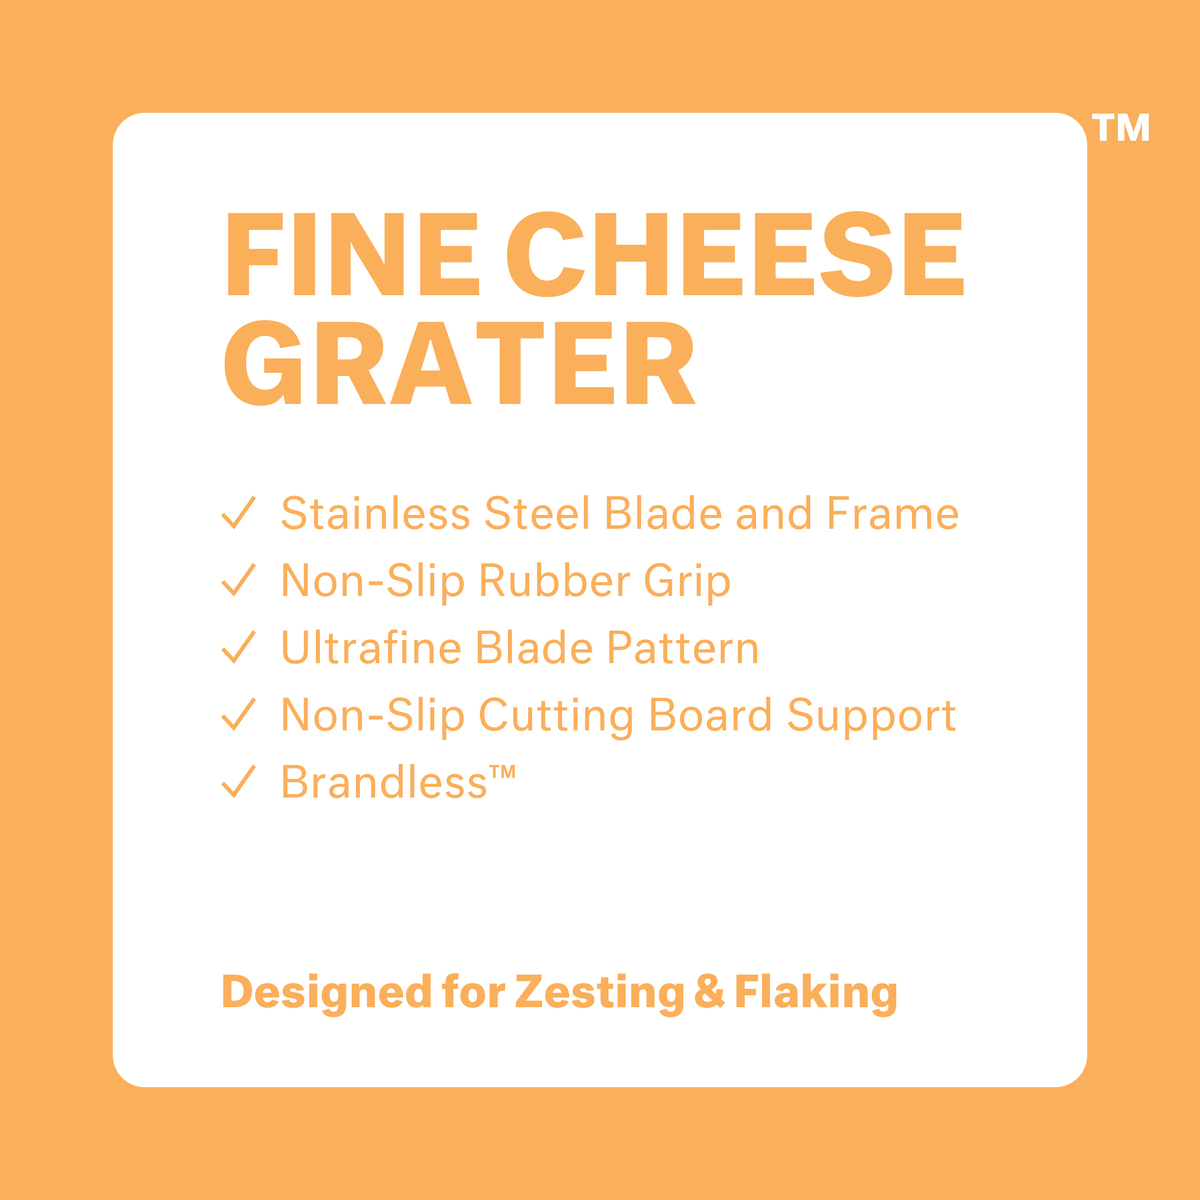 Fine Cheese Grater: stainless steel blade and frame, non-slip rubber grip, ultrafine blade pattern, non-slip cutting board support, brandless. Designed for zesting and flaking.